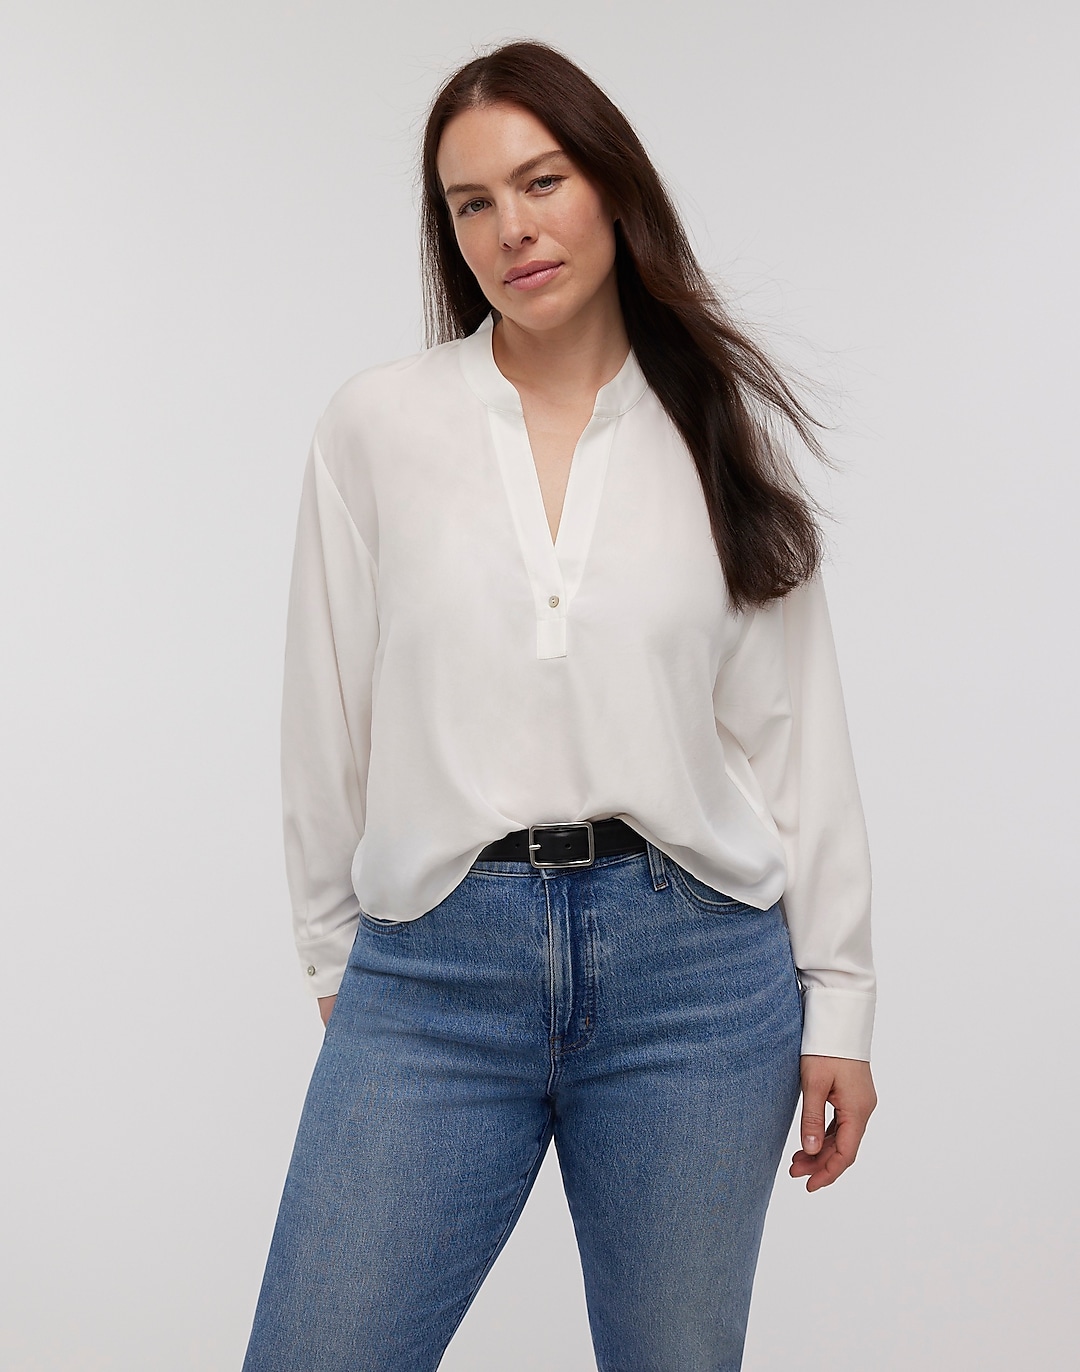 Long-Sleeve Popover Top in Silk | Madewell